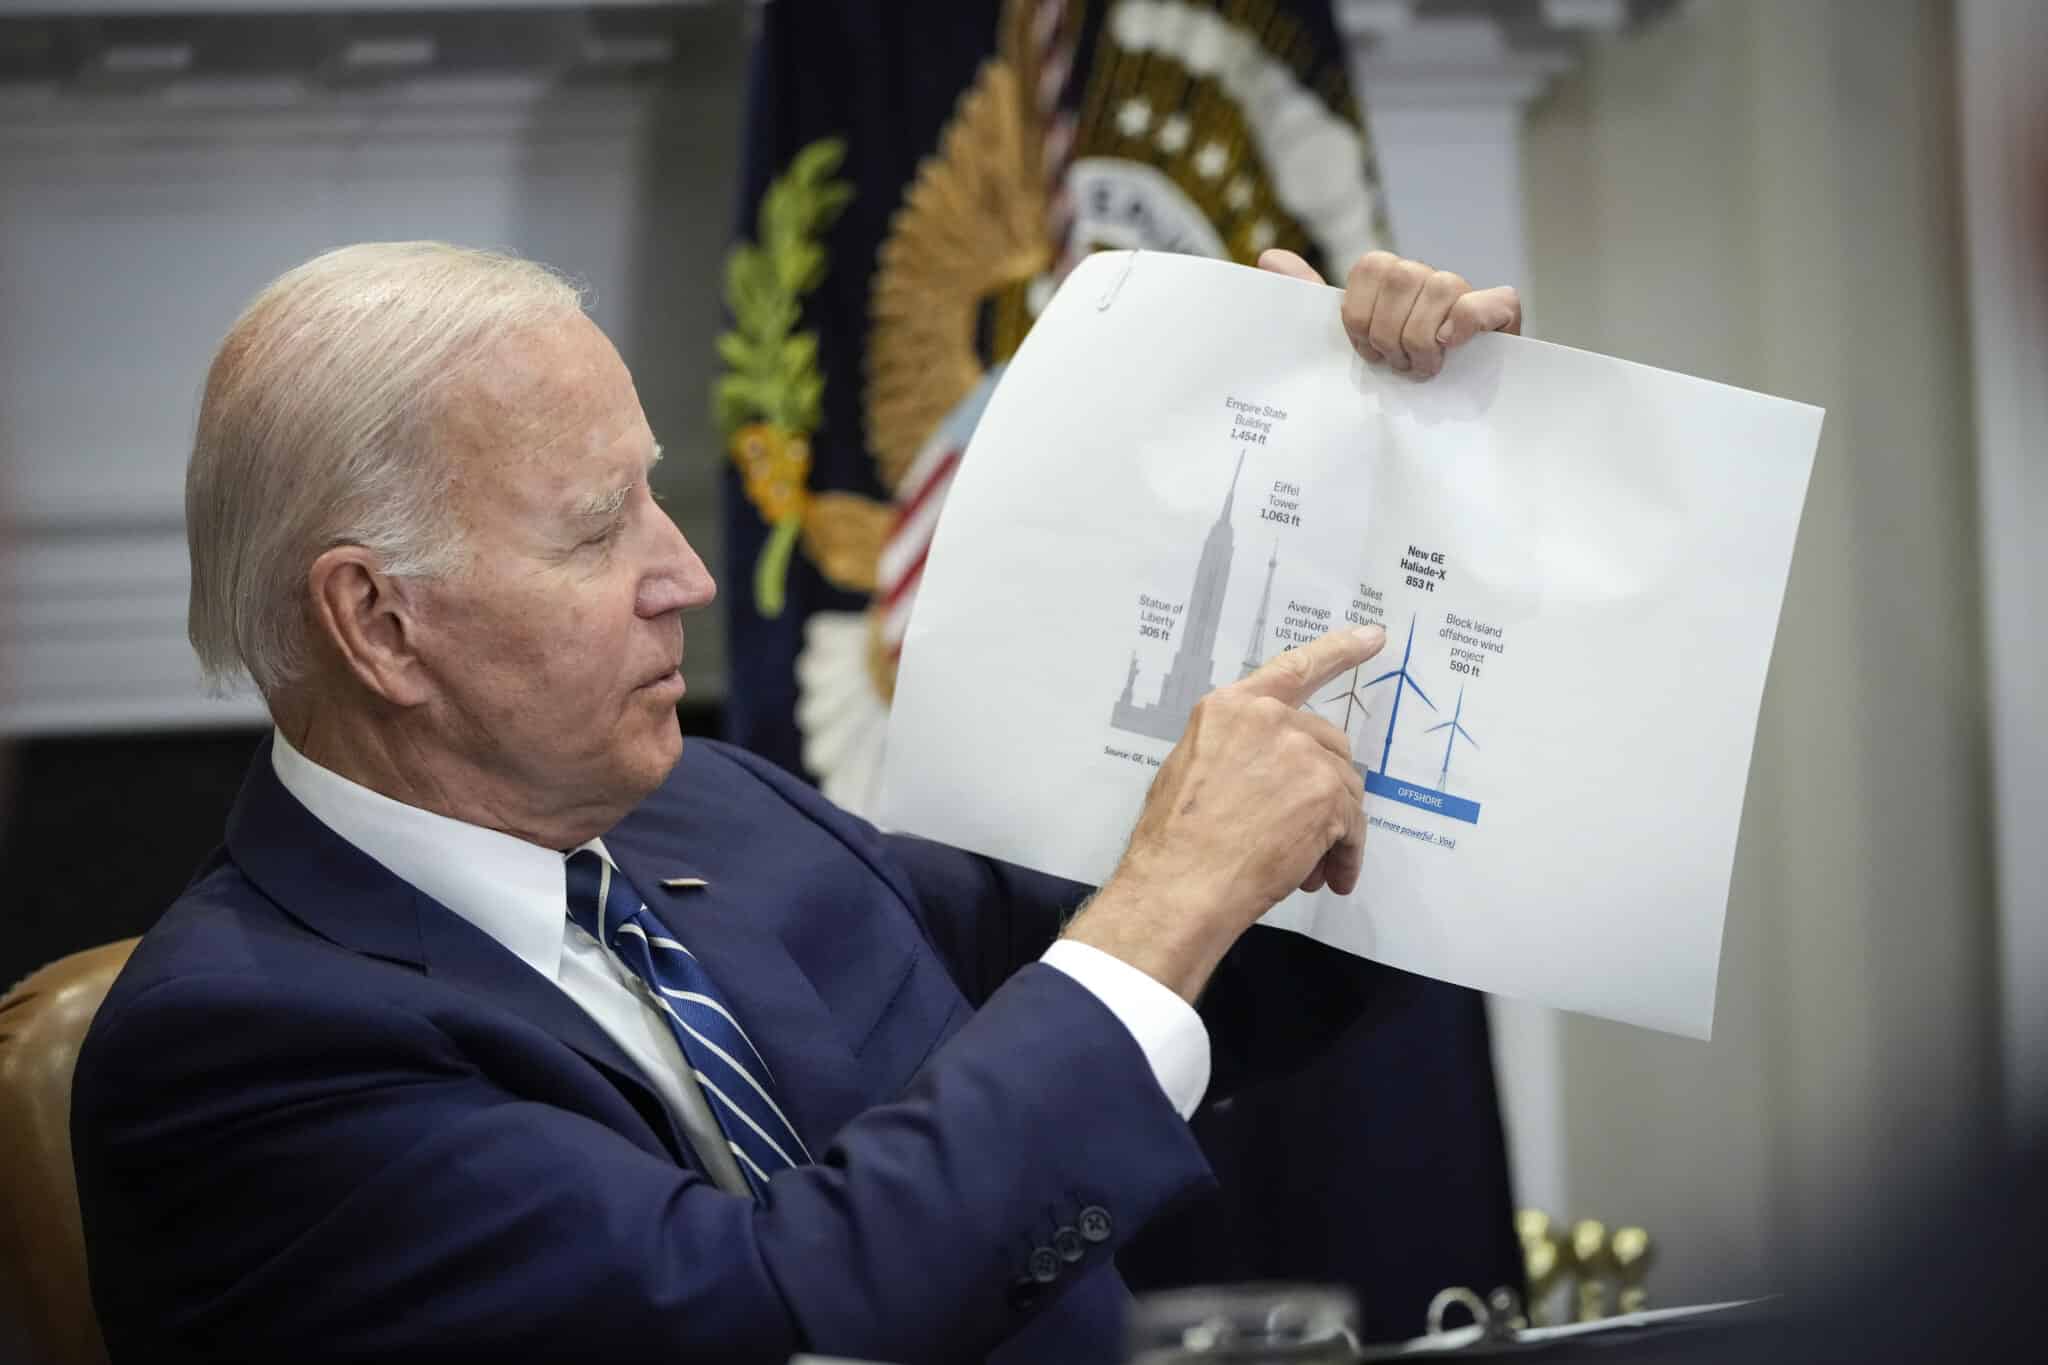 President Joe Biden points to a wind turbine size comparison chart during a meeting about the Federal-State Offshore Wind Implementation Partnership in the Roosevelt Room of the White House